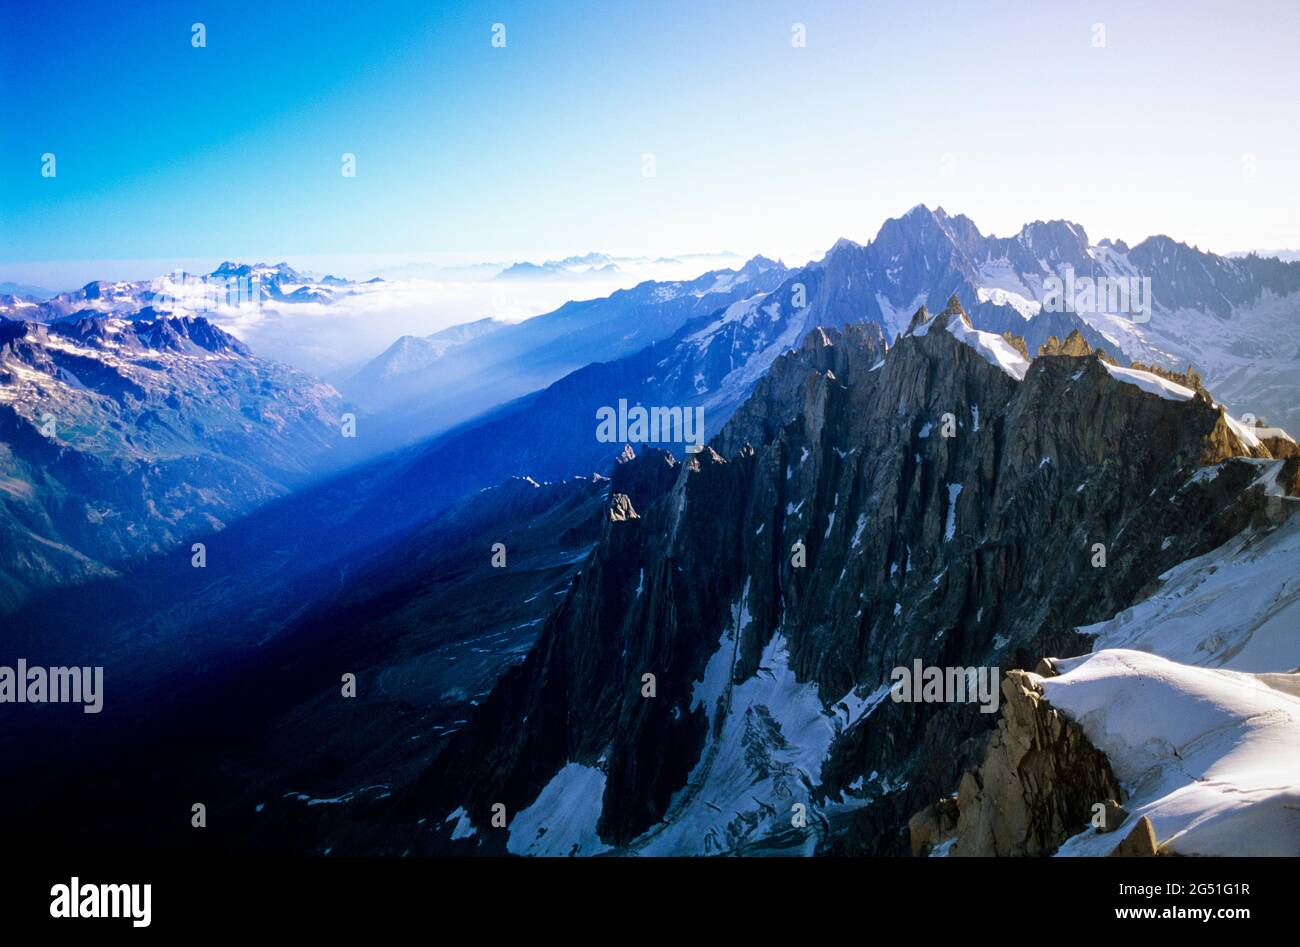 View of mountains in winter, Mont Blanc Area, France Stock Photo